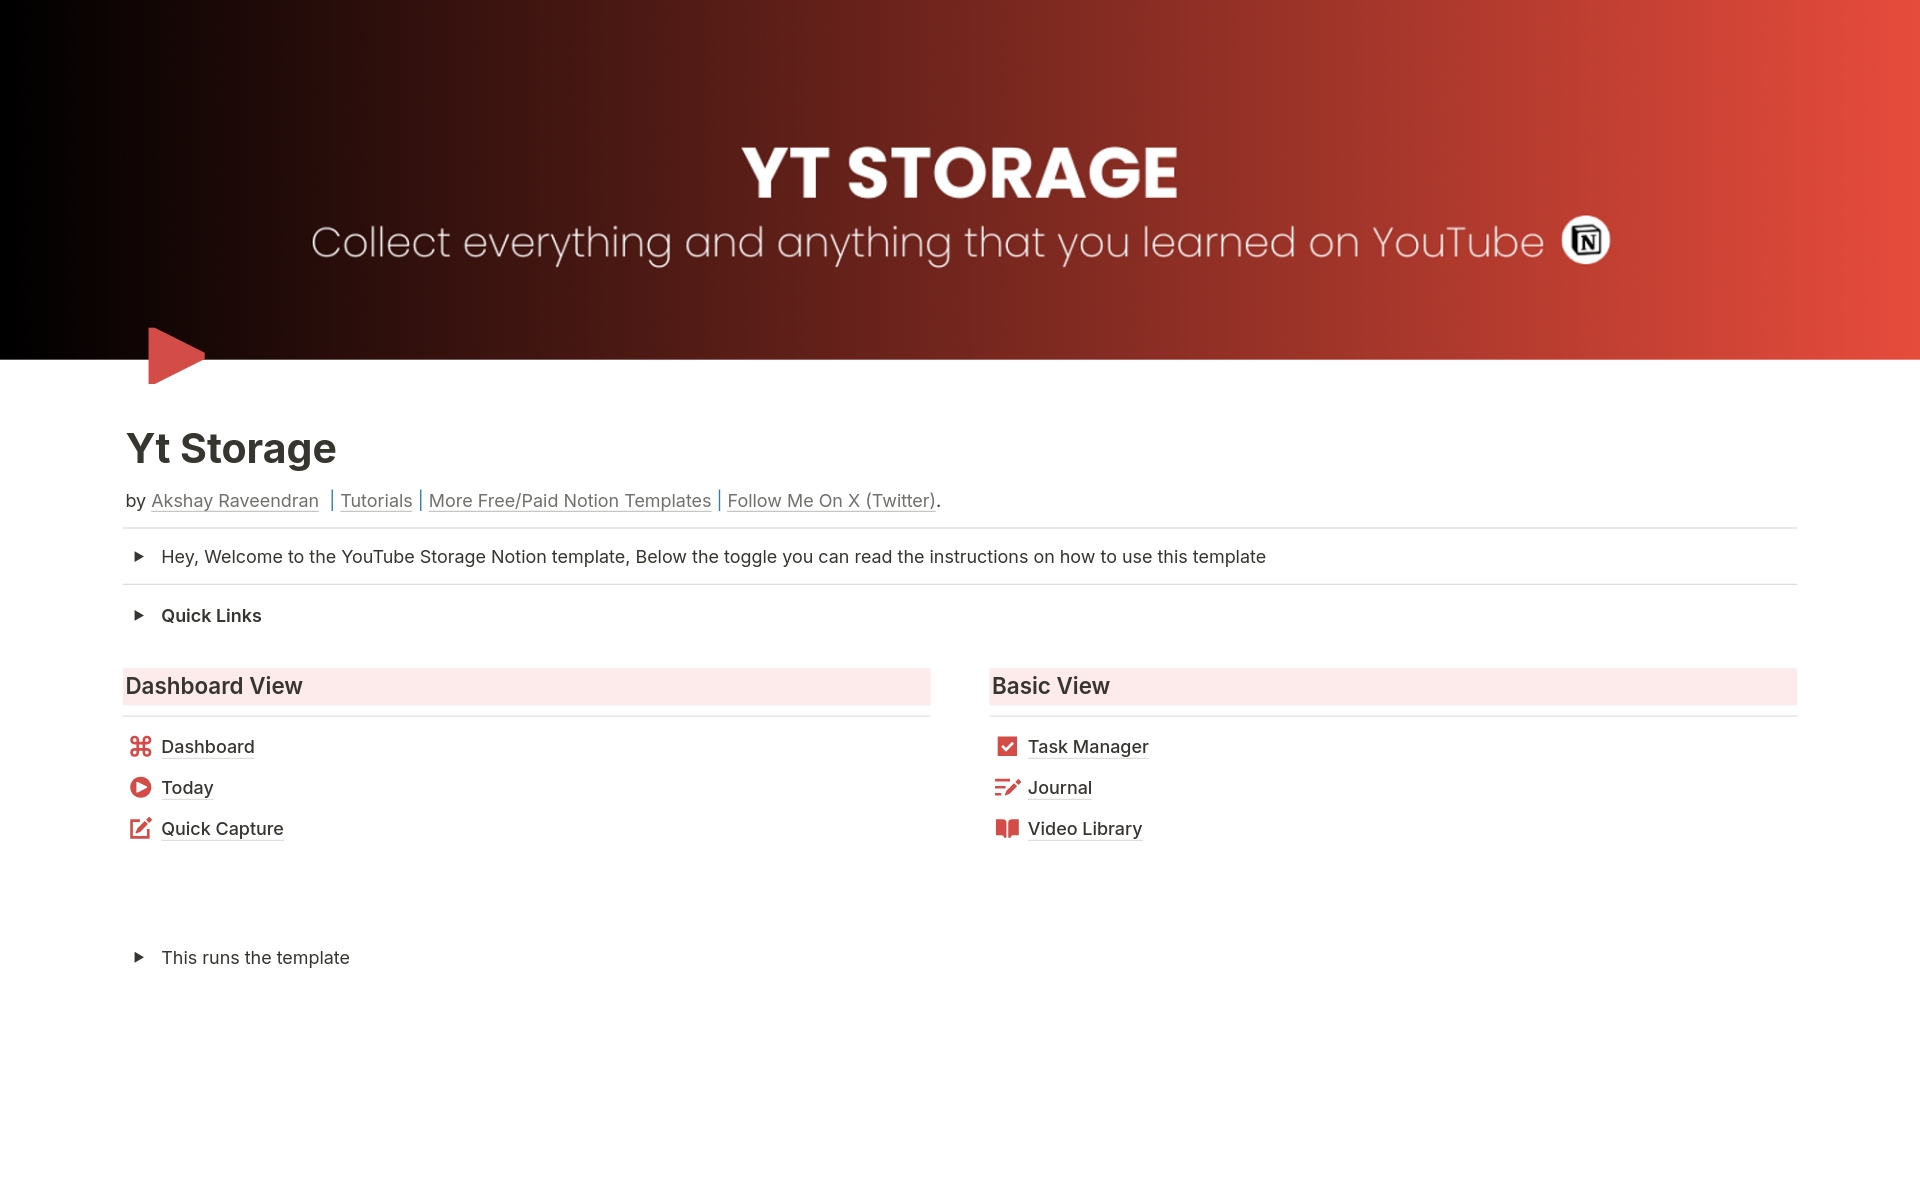 The YouTube Note Taking System™️ AKA YouTube Storage is a Notion template designed to help you write notes, organise and record everything you learn from YouTube. It's like a digital notebook where you can store and track all your learning in one place.